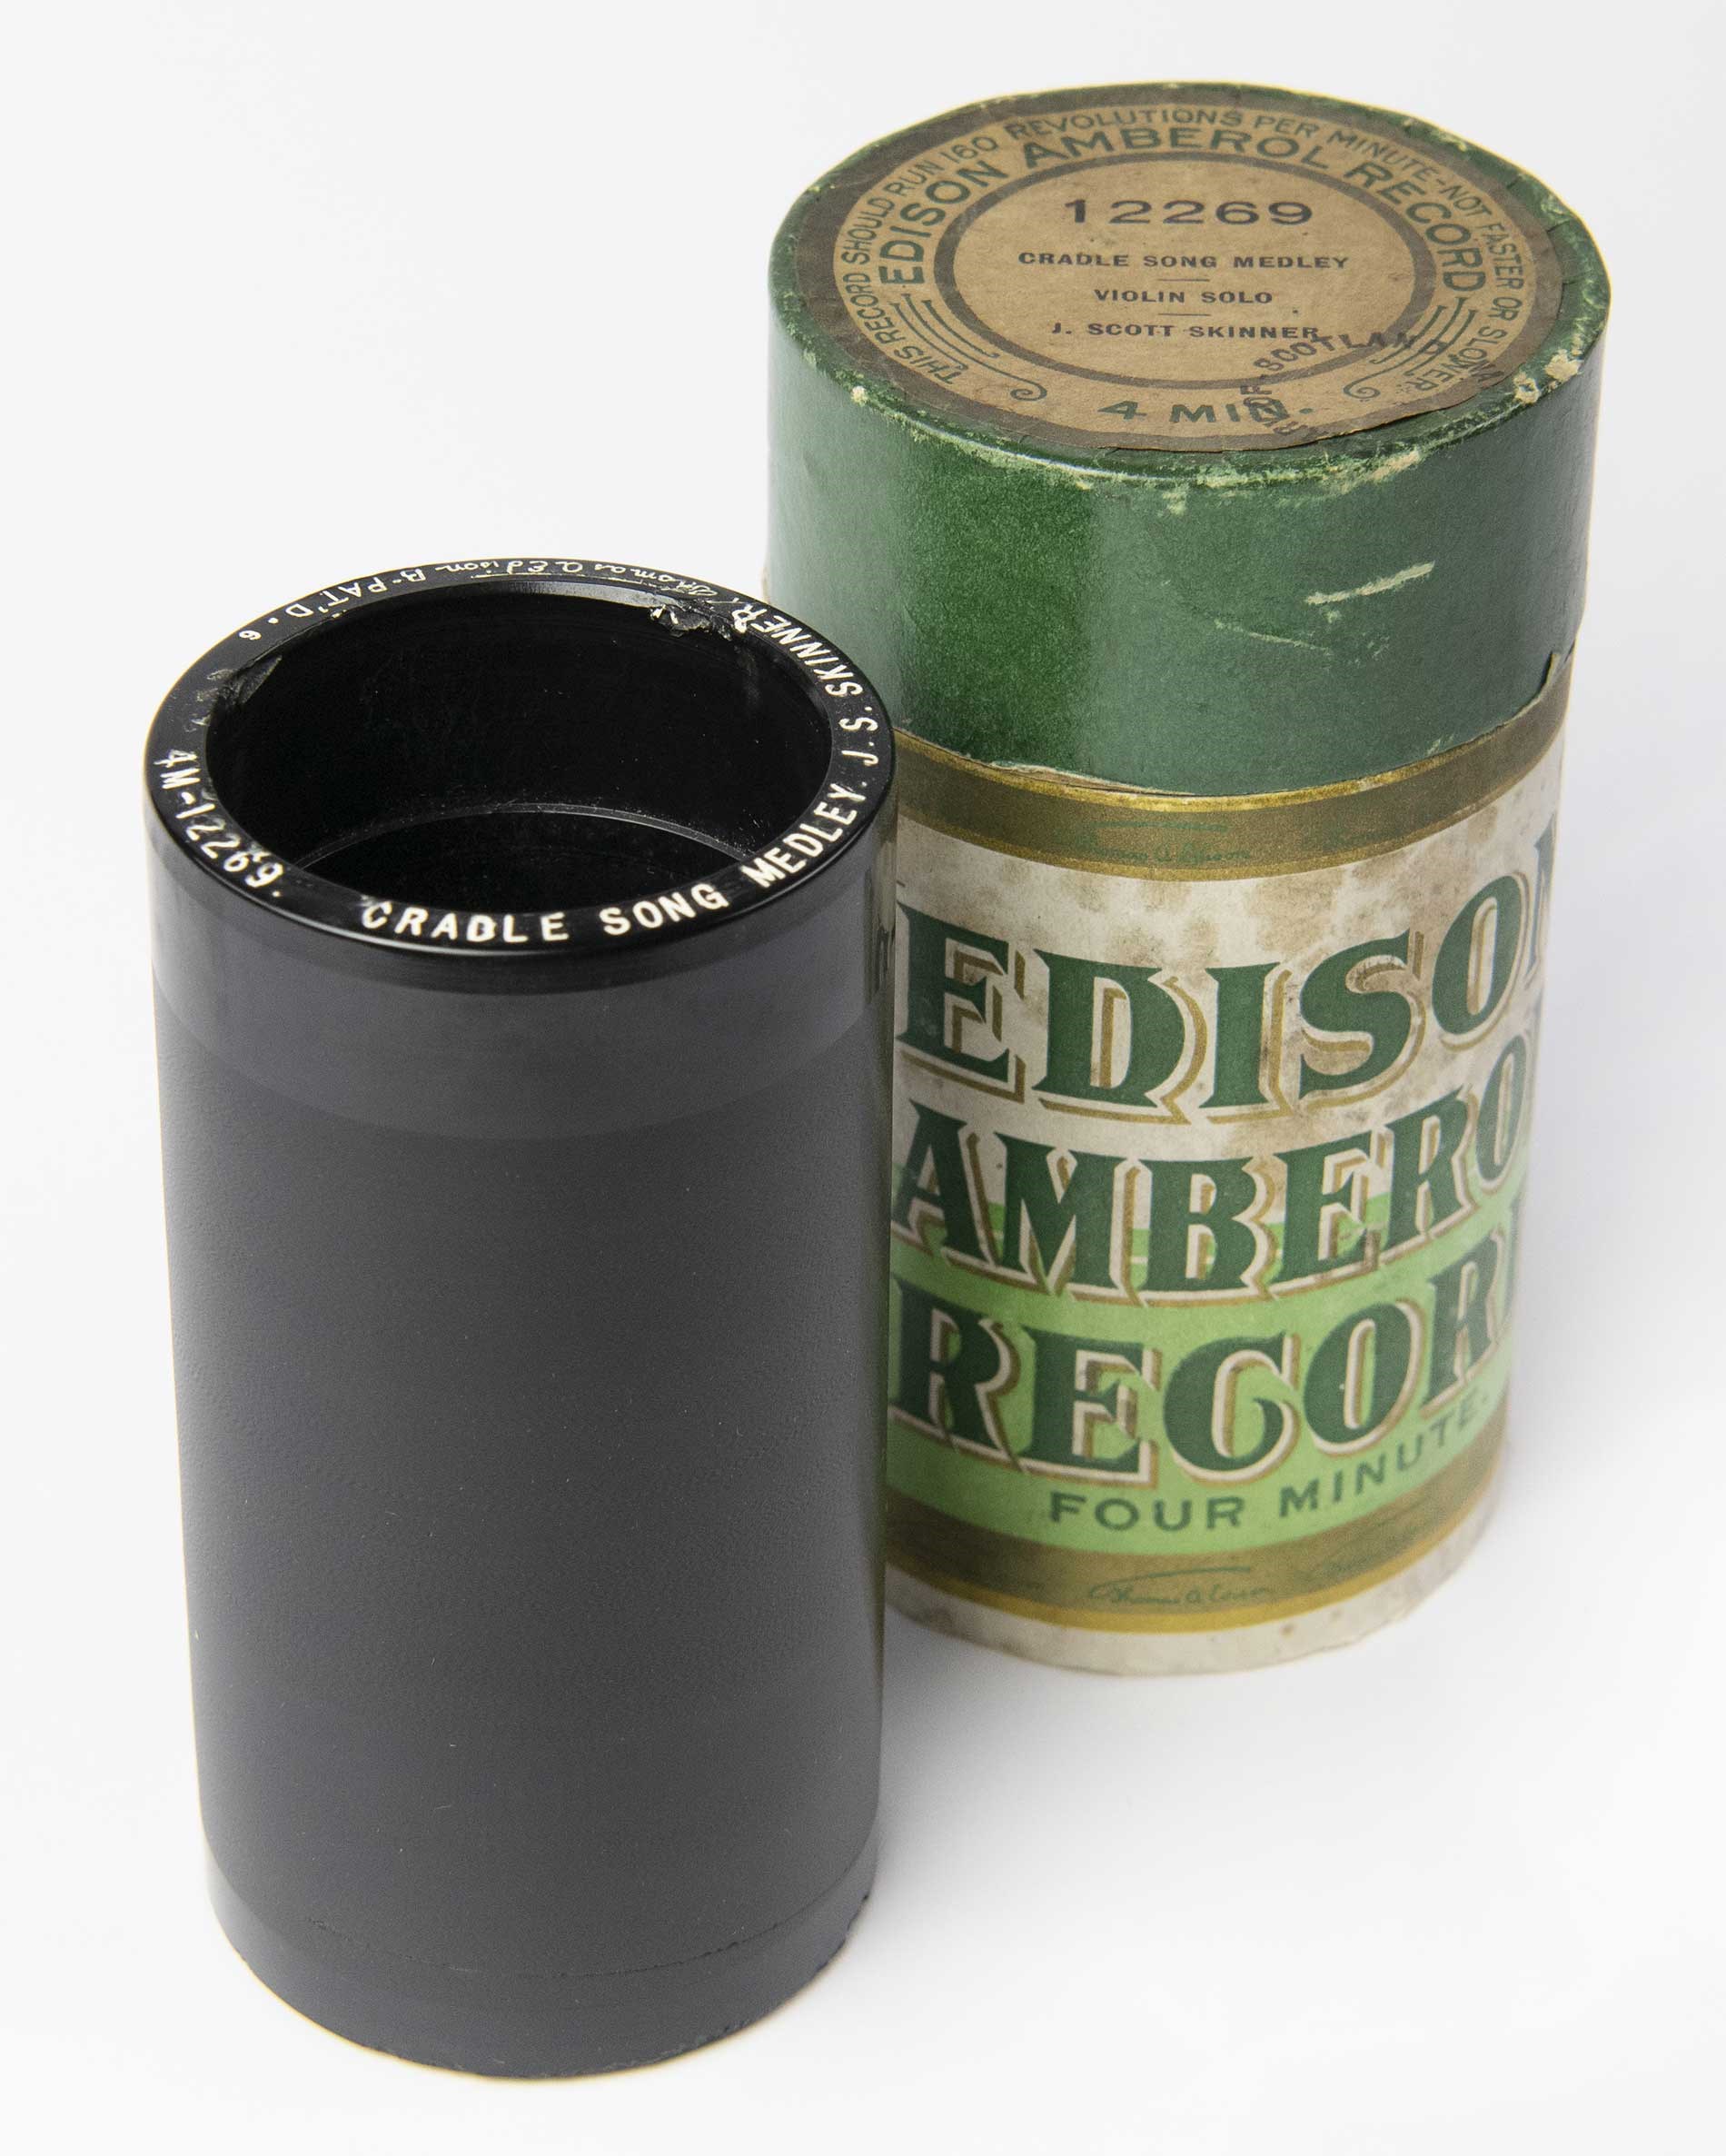 Photo of a wax cylinder recording